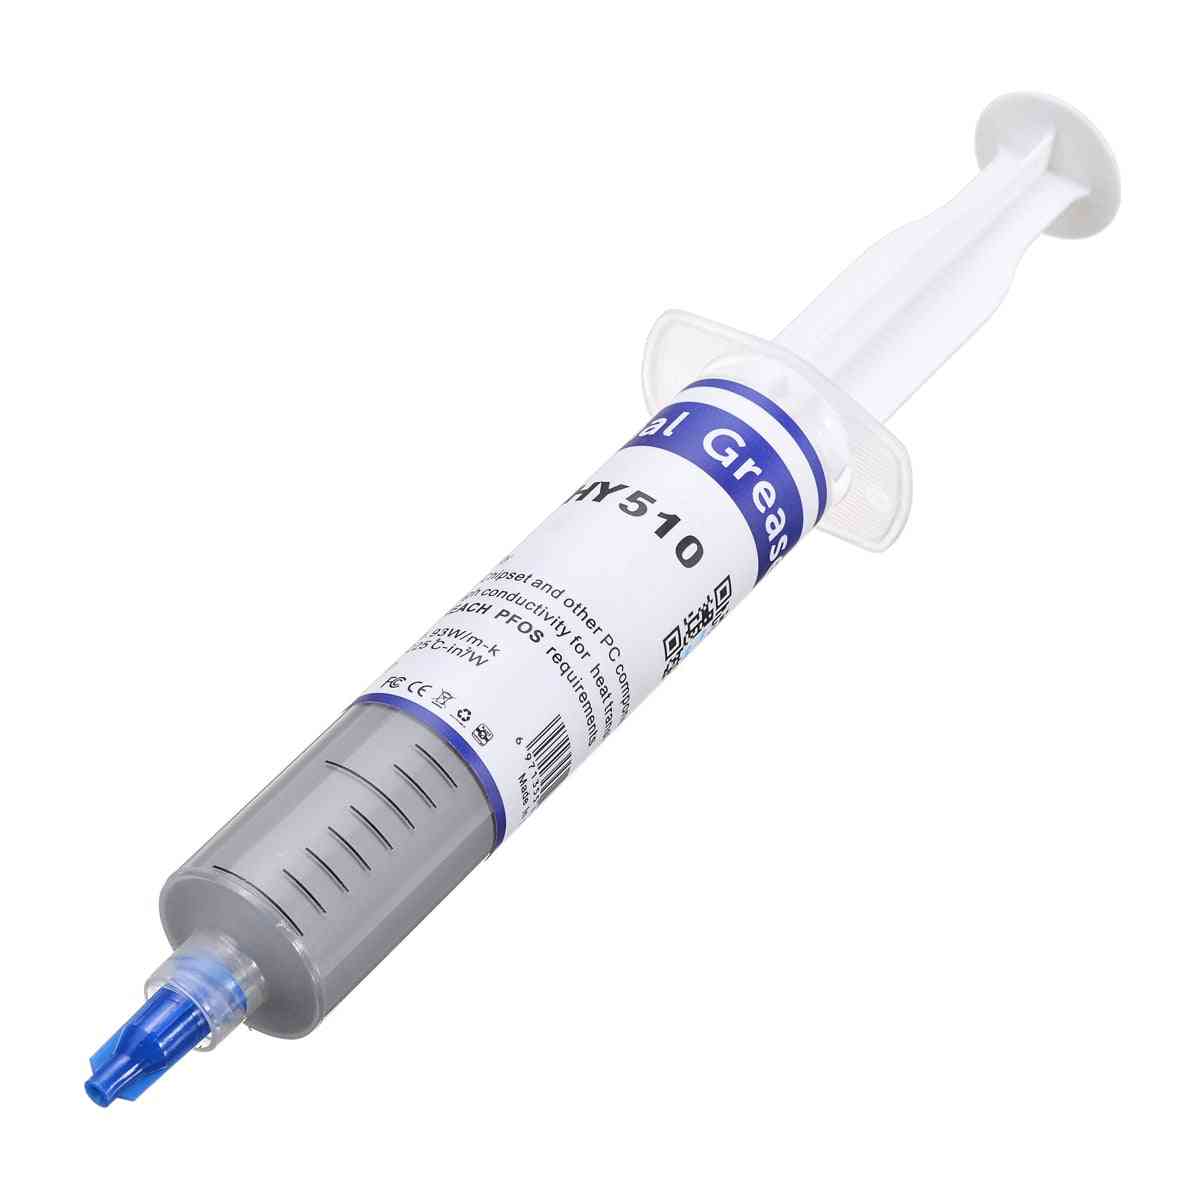 Hy-510 Thermal Paste Grease